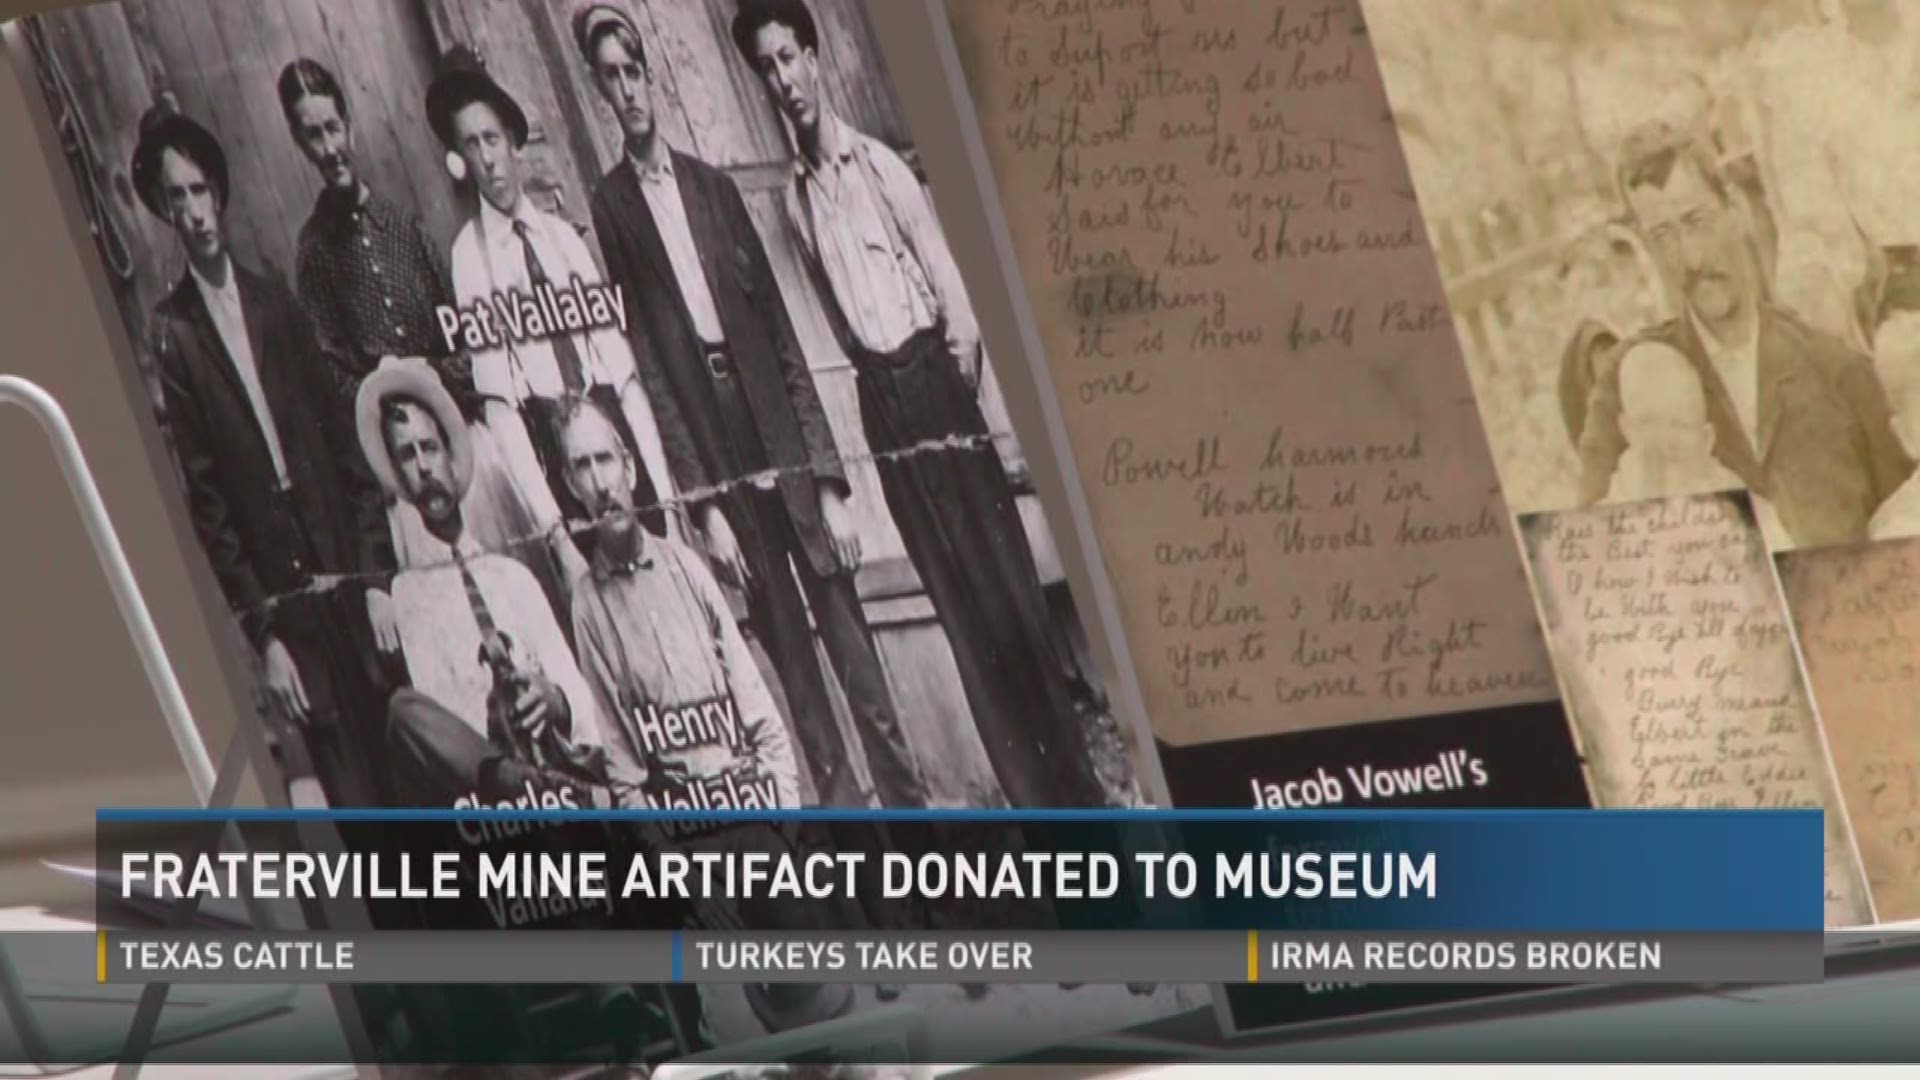 More than a hundred years after a horrific mine explosion in east Tennessee descendants of one of those miners made a historic donation to the East Tennessee history museum